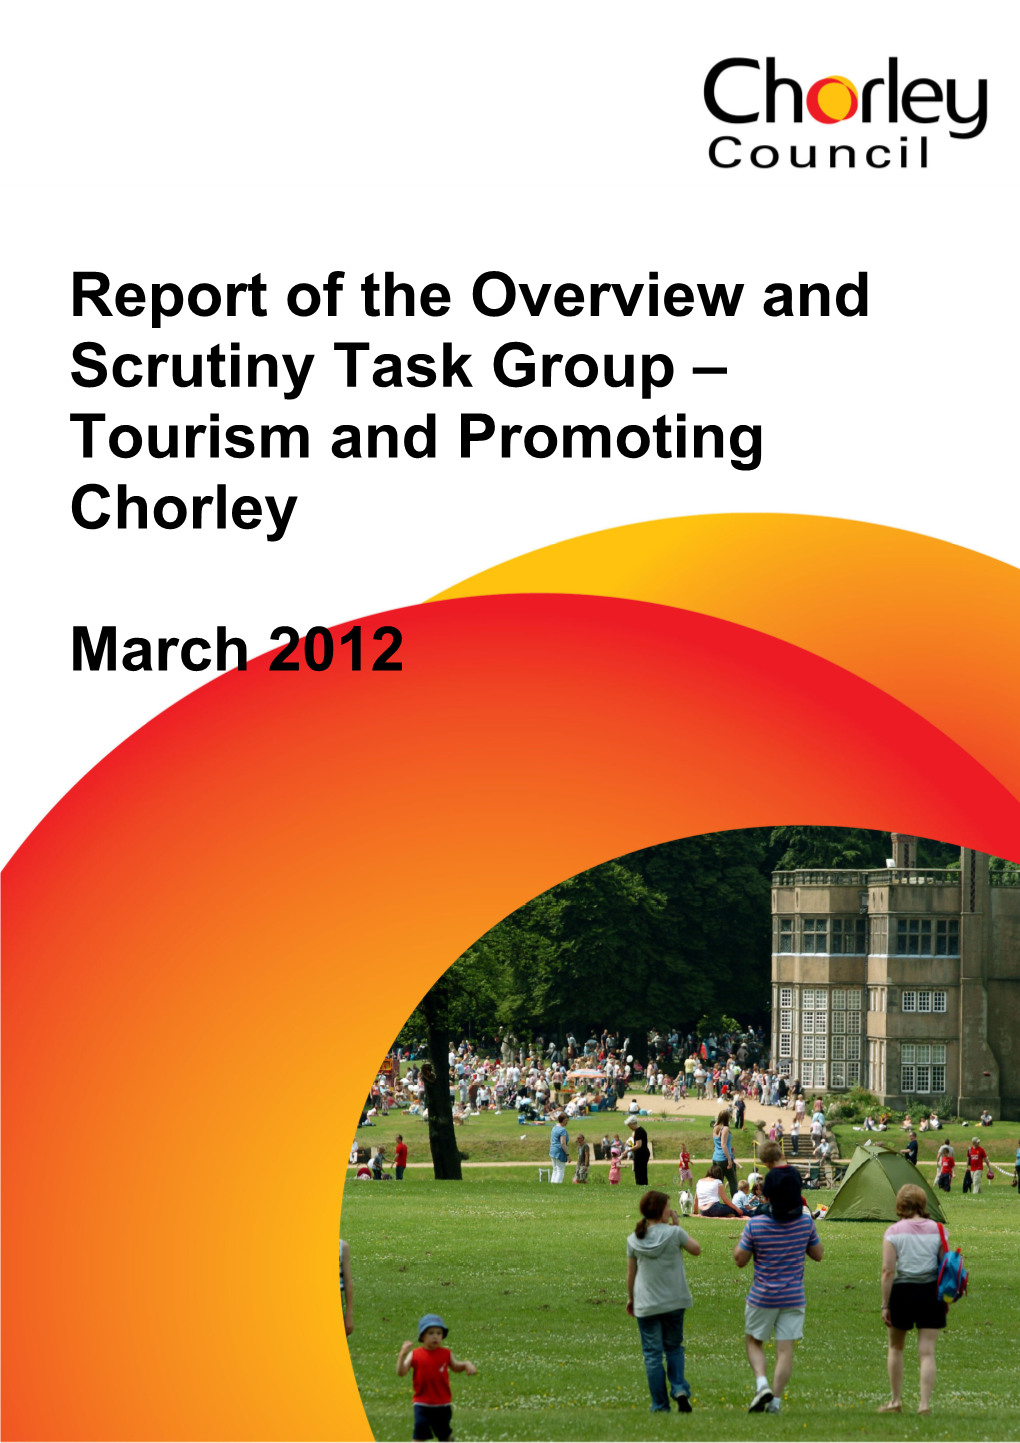 Report of the Overview and Scrutiny Task Group – Tourism and Promoting